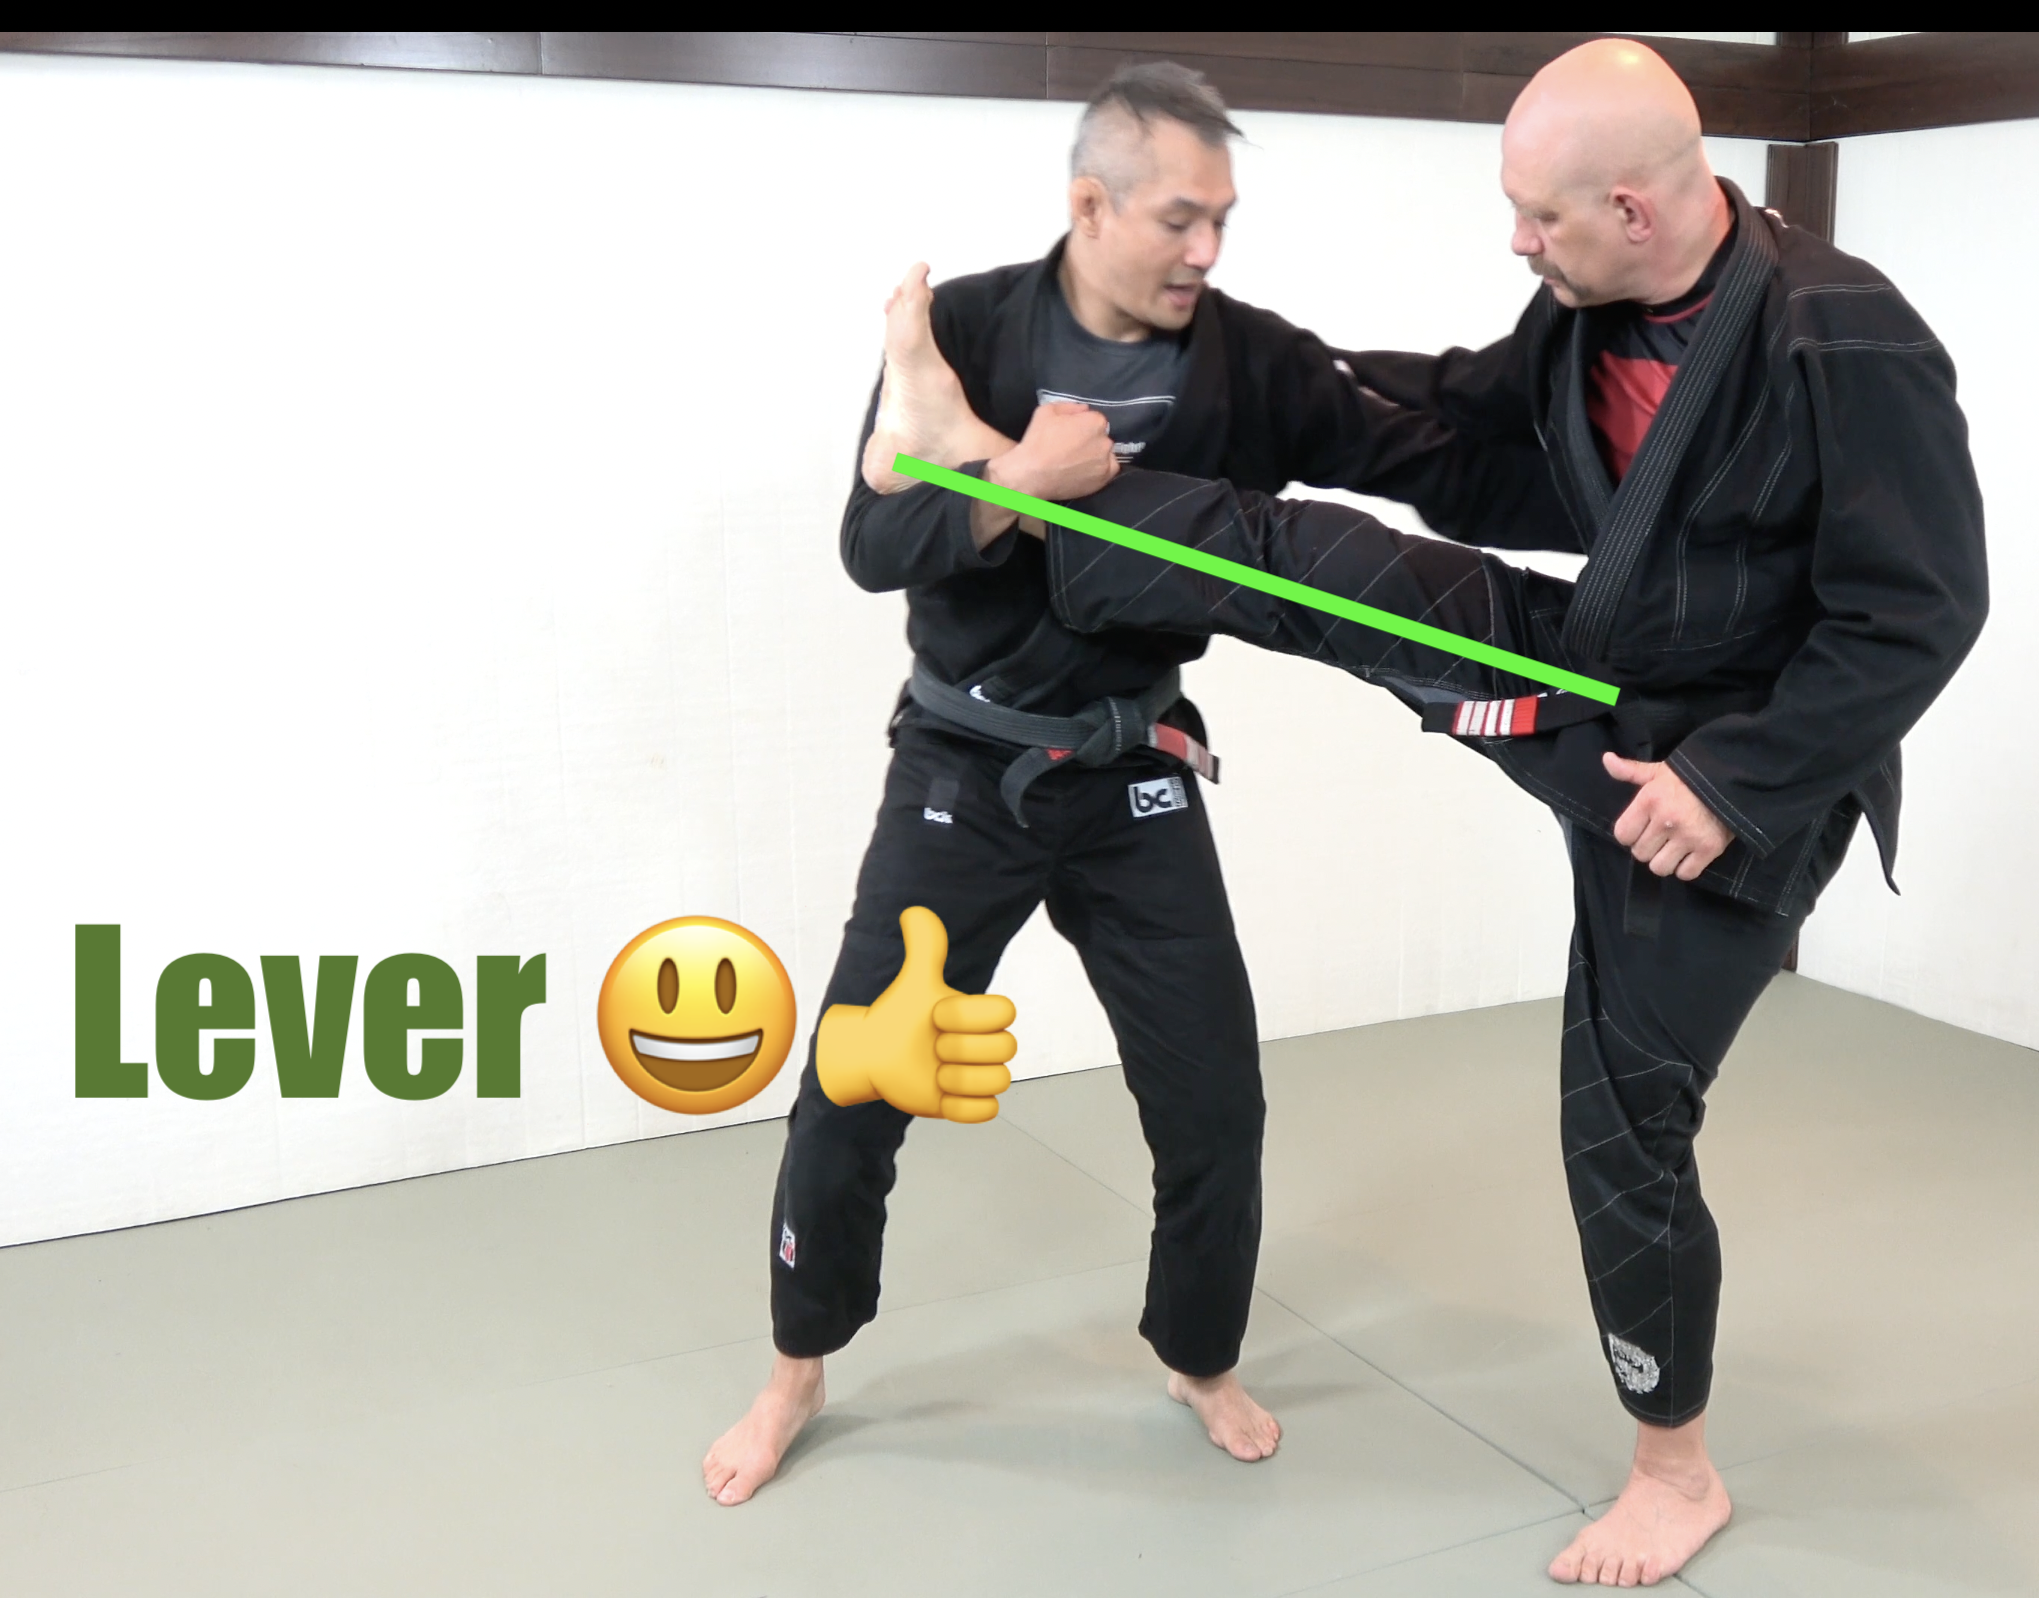 demonstration of a lever for BJJ Techniques